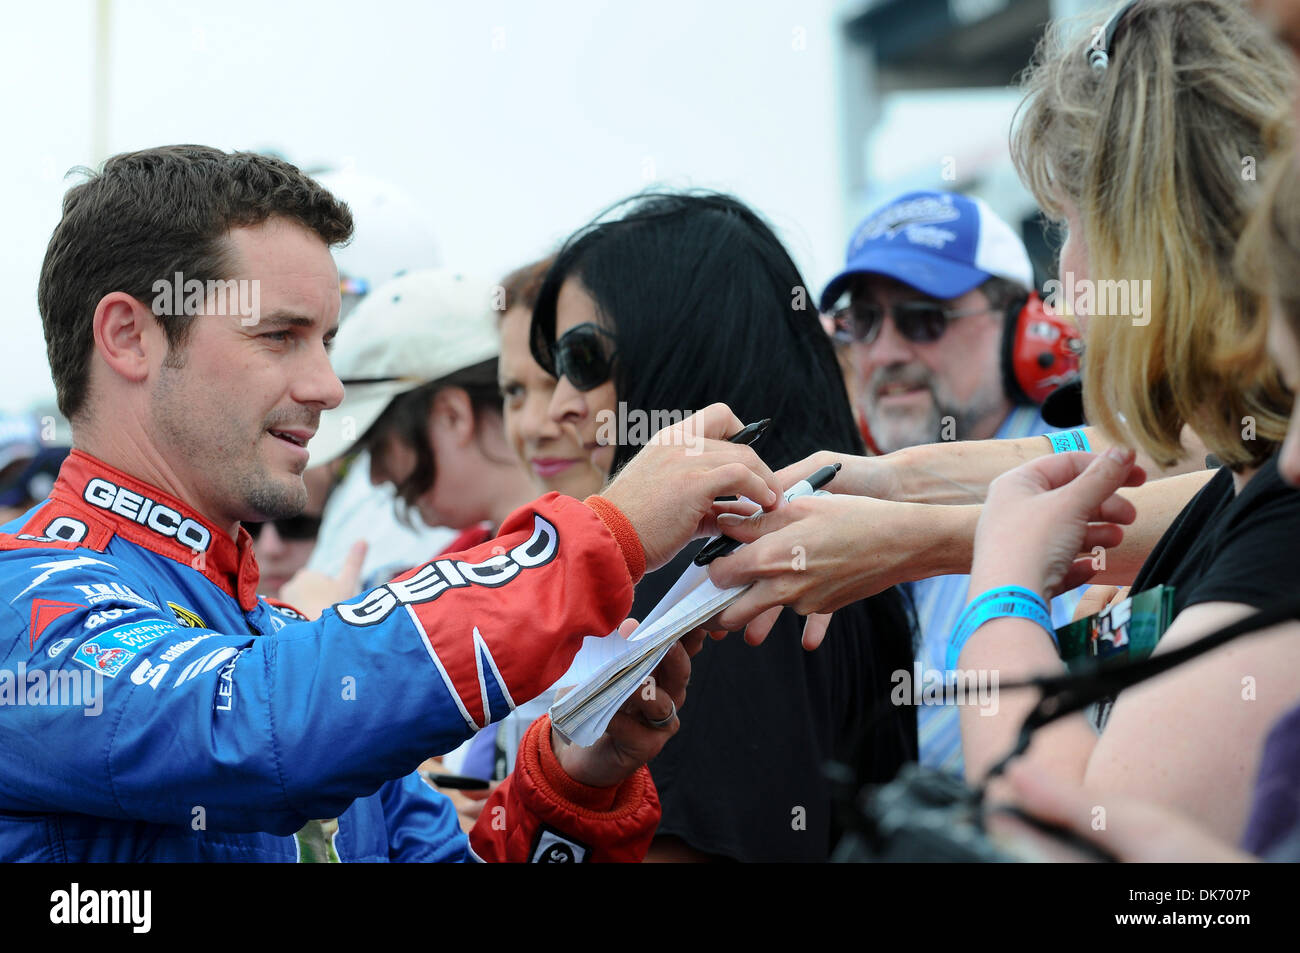 June 11, 2011 - Long Pond, Pennsylvania, United States of America - Casey Mears signs autographs for the fans after his qualifying run for the 5-Hour Energy 500 at the Pocono Raceway. (Credit Image: © Brian Freed/Southcreek Global/ZUMAPRESS.com) Stock Photo